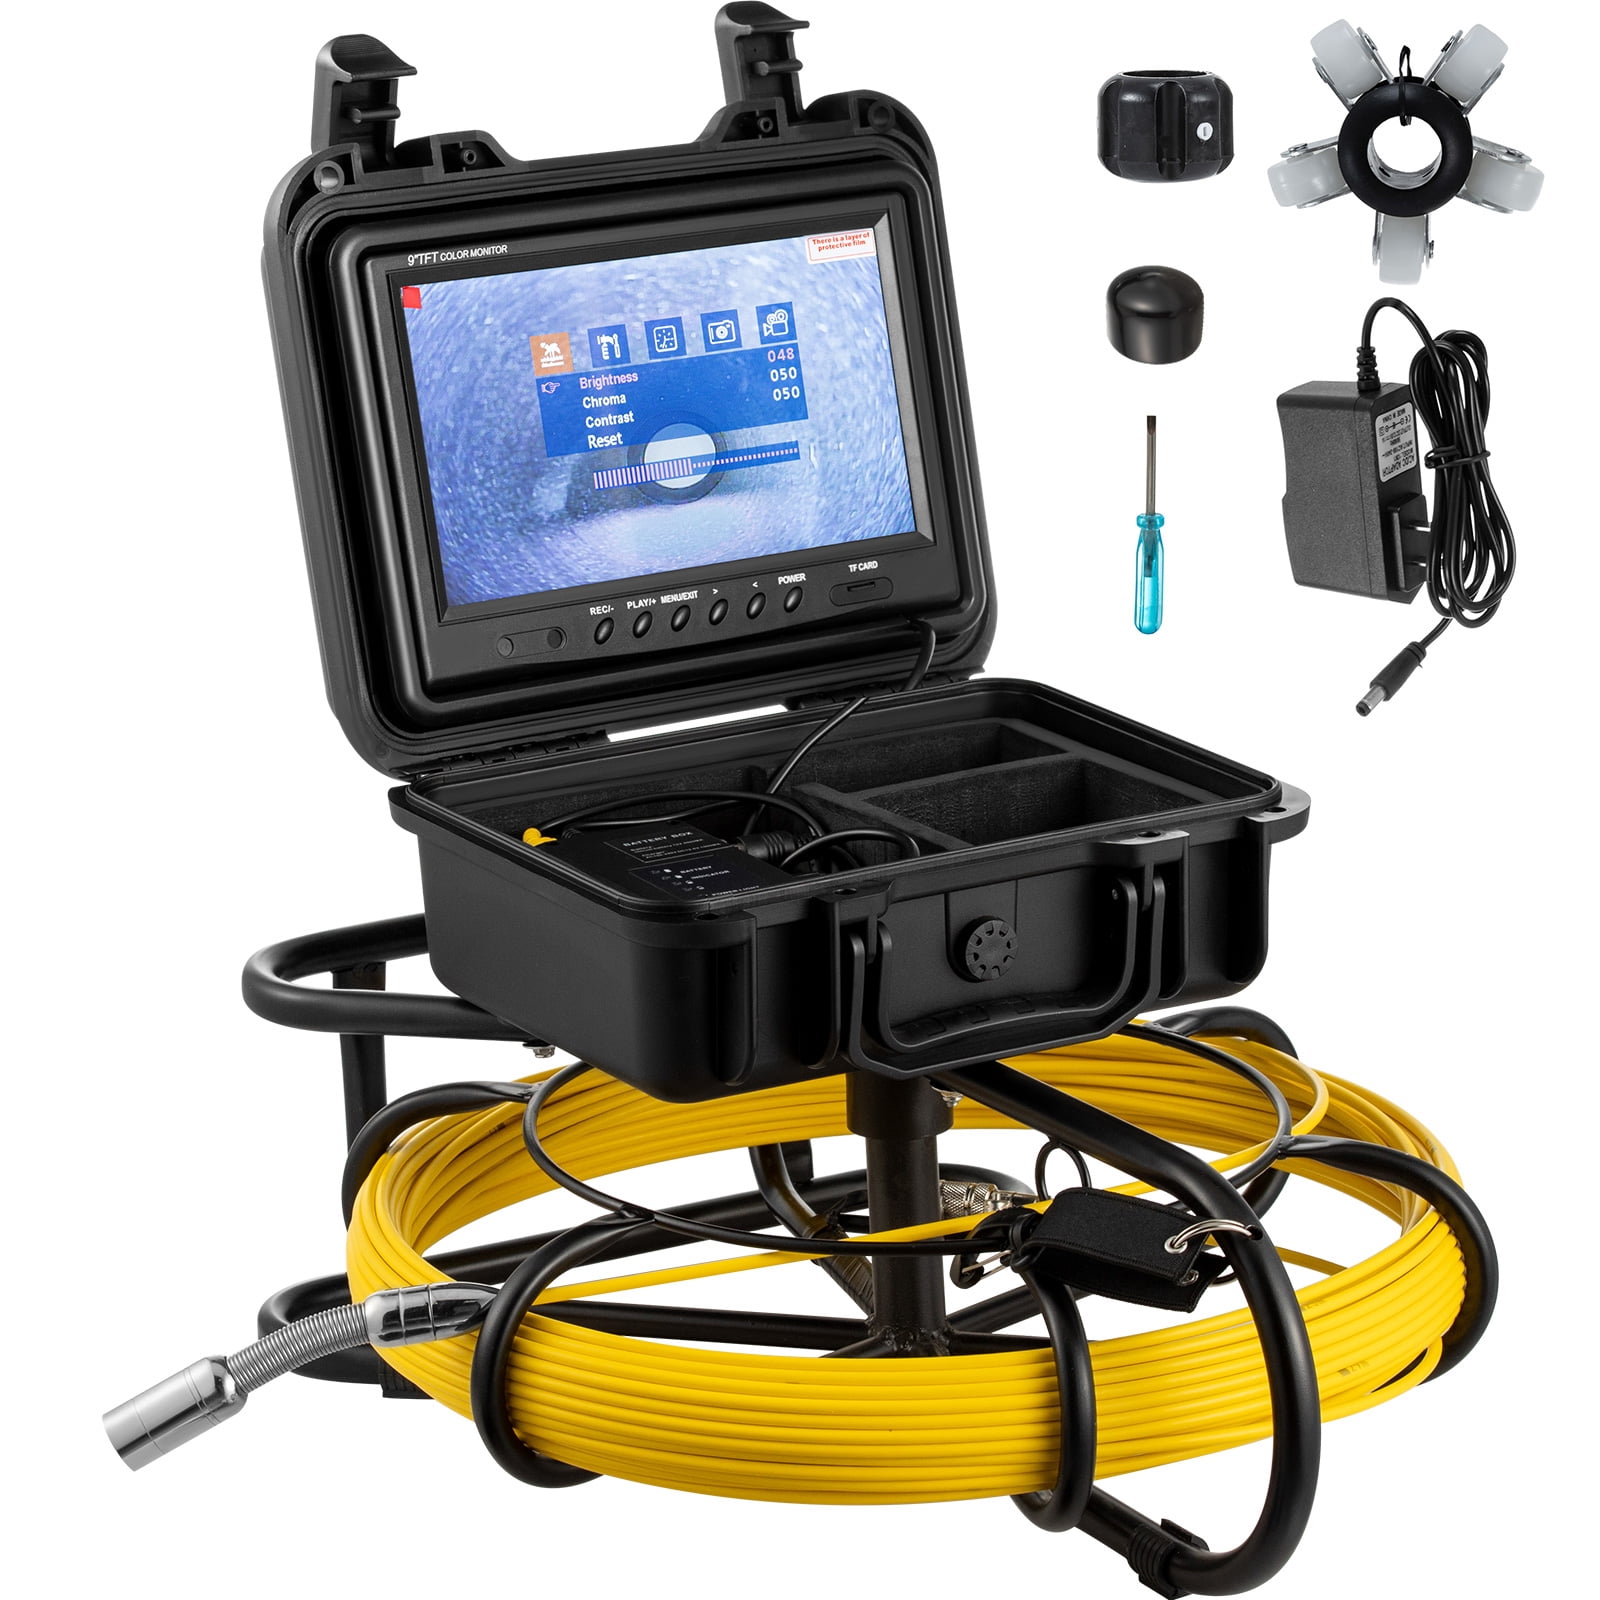 WaterProof Pipe Inspection Camera Plumbing USB Drain Endoscope Sewer-Tool-Parts 